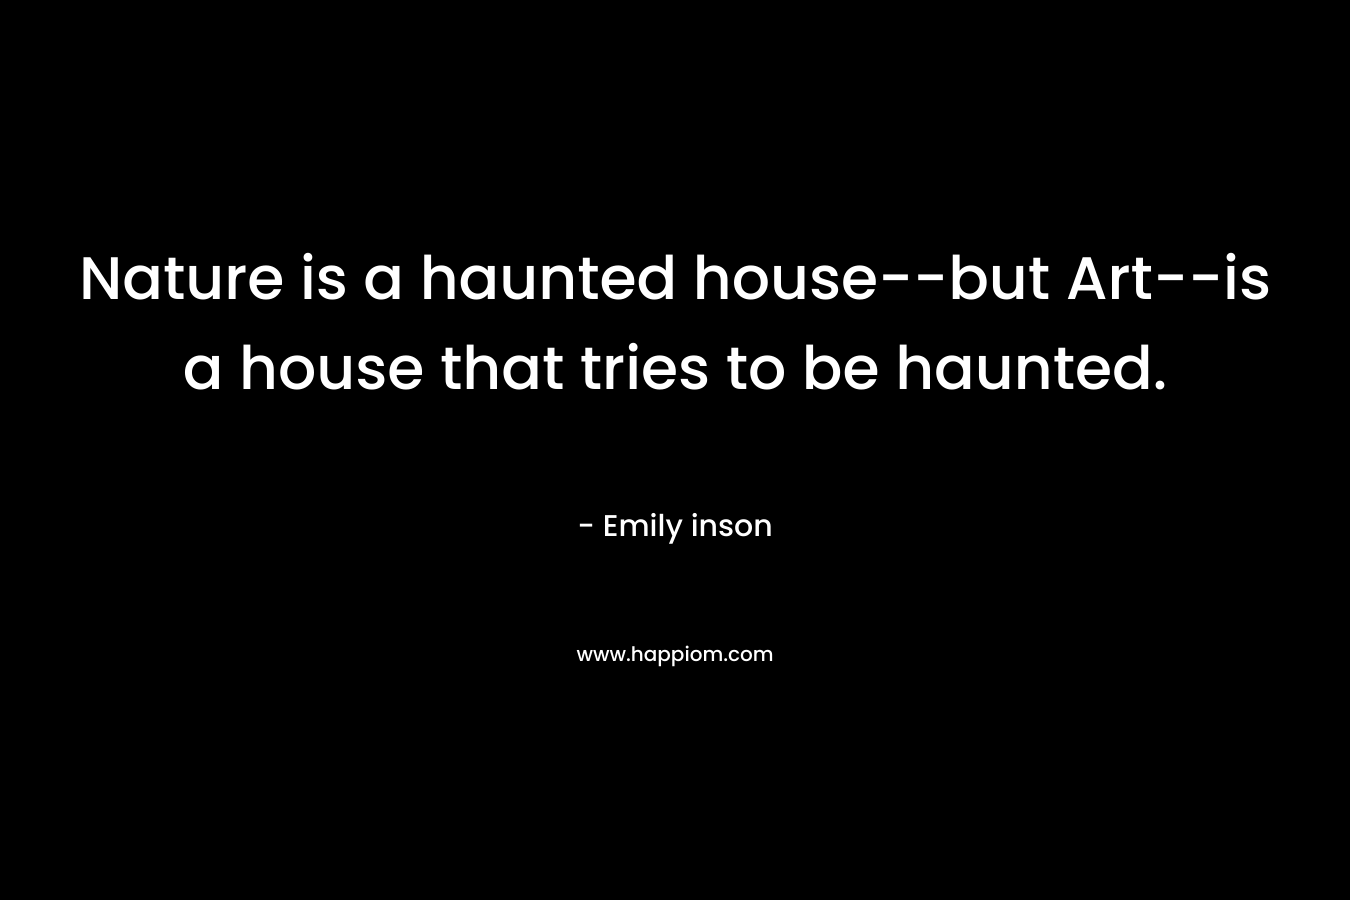 Nature is a haunted house--but Art--is a house that tries to be haunted.